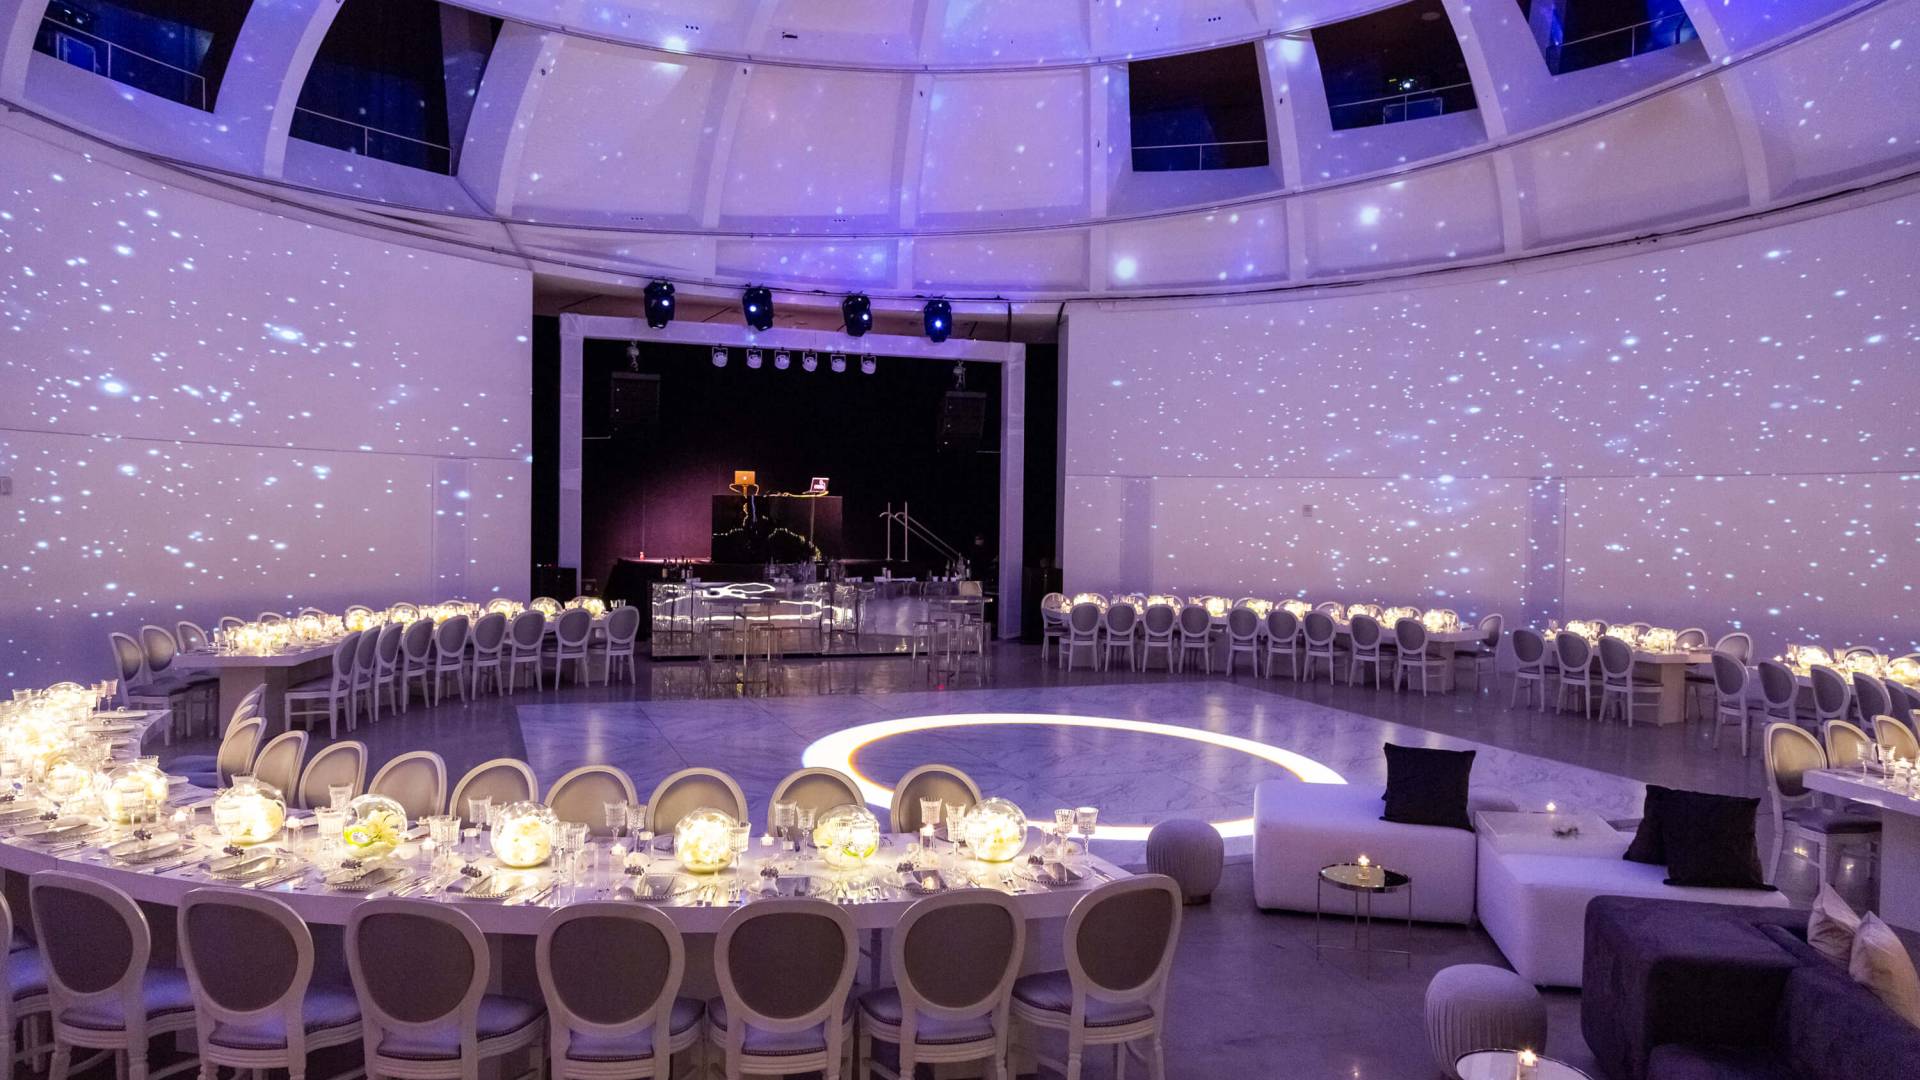 circular table for wedding reception with white flowers and purple lighting